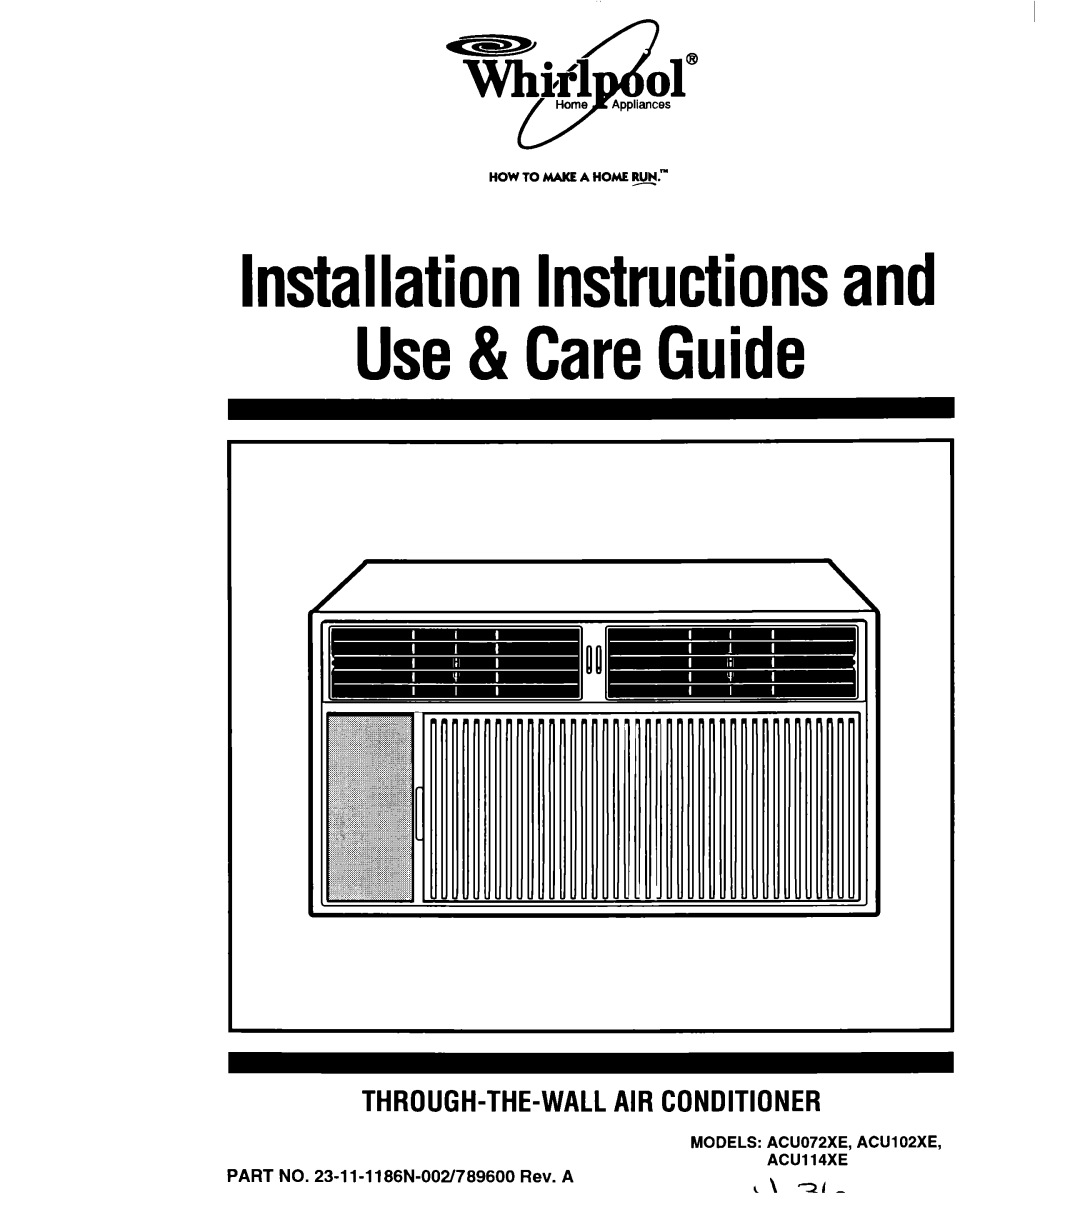 Whirlpool ACU072XE installation instructions Through-The-Wallairconditioner, PART NO. 23-1 l-1 186N-OOiY789600Rev. A 